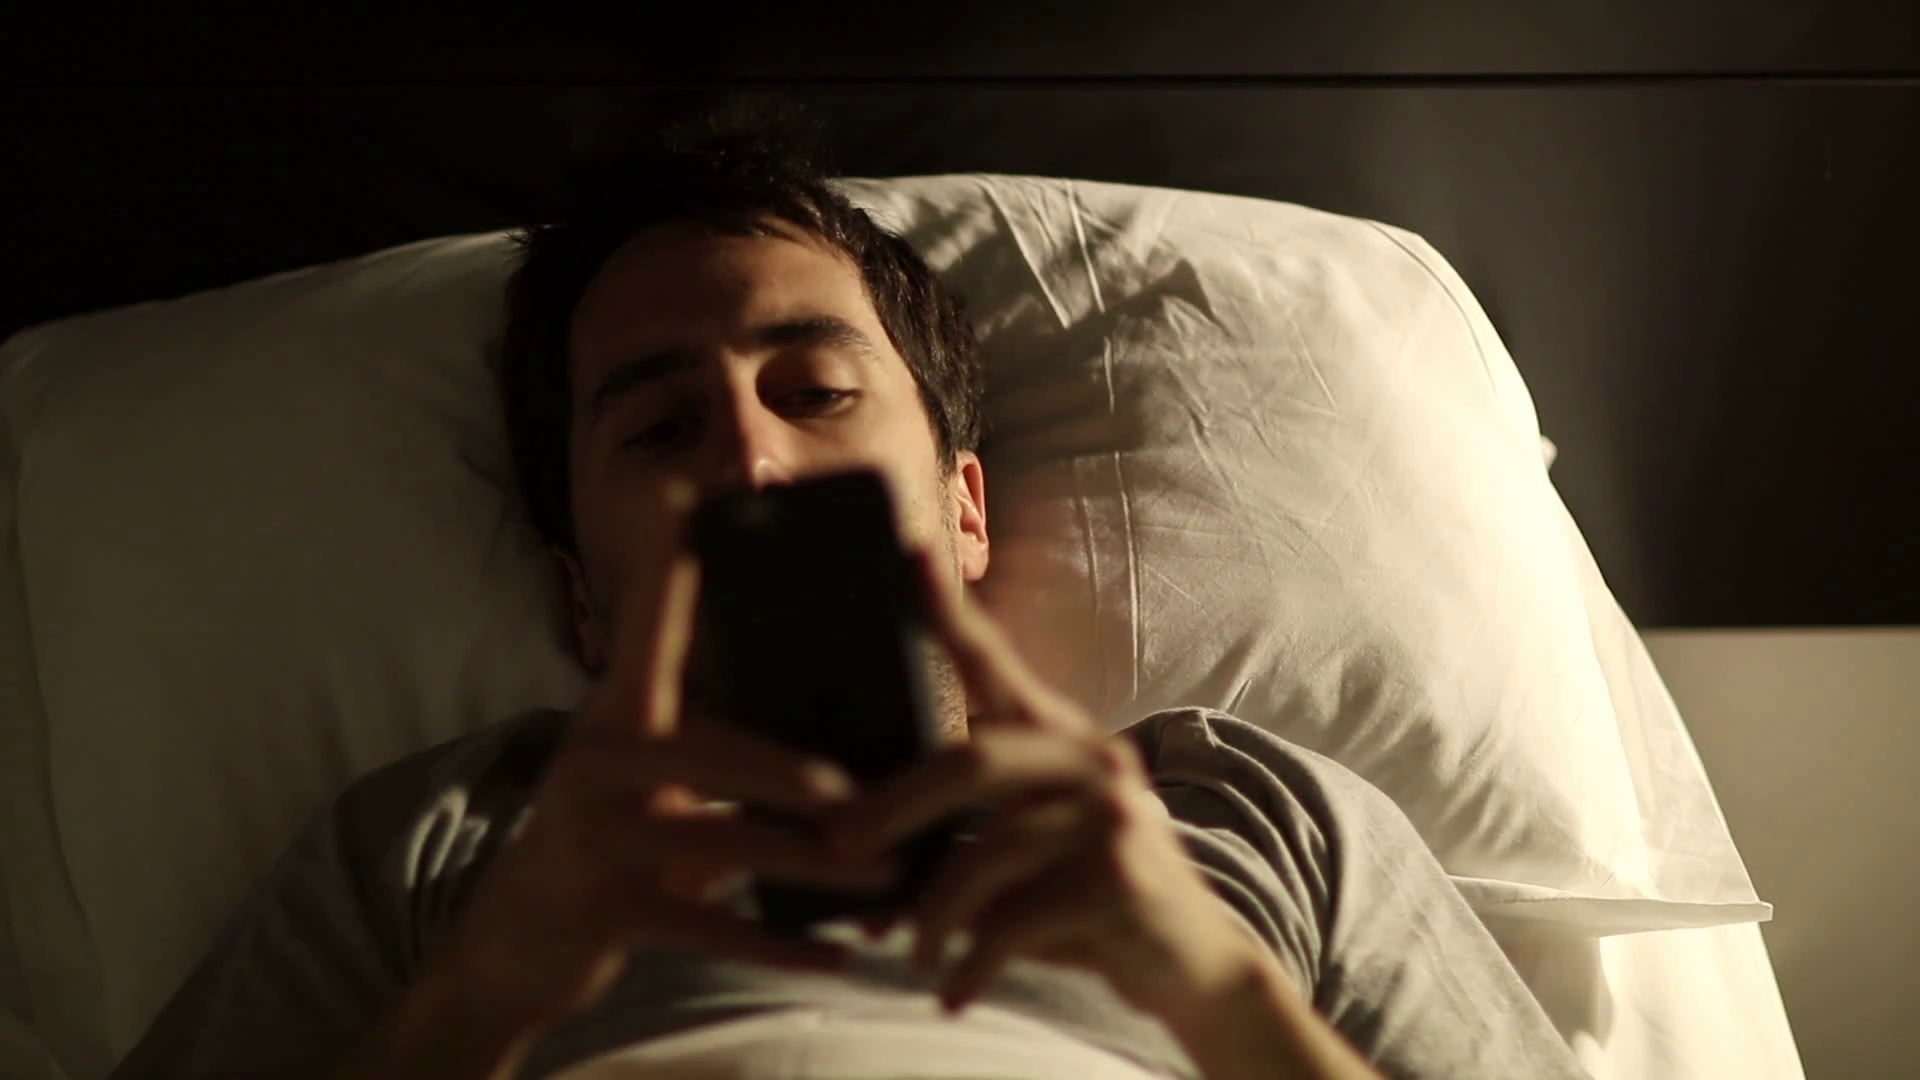 What Zombie Are You? person using cellphone in bed man using smartphone mobile cellphone in bed _bdgkn8u8ue_thumbnail full01